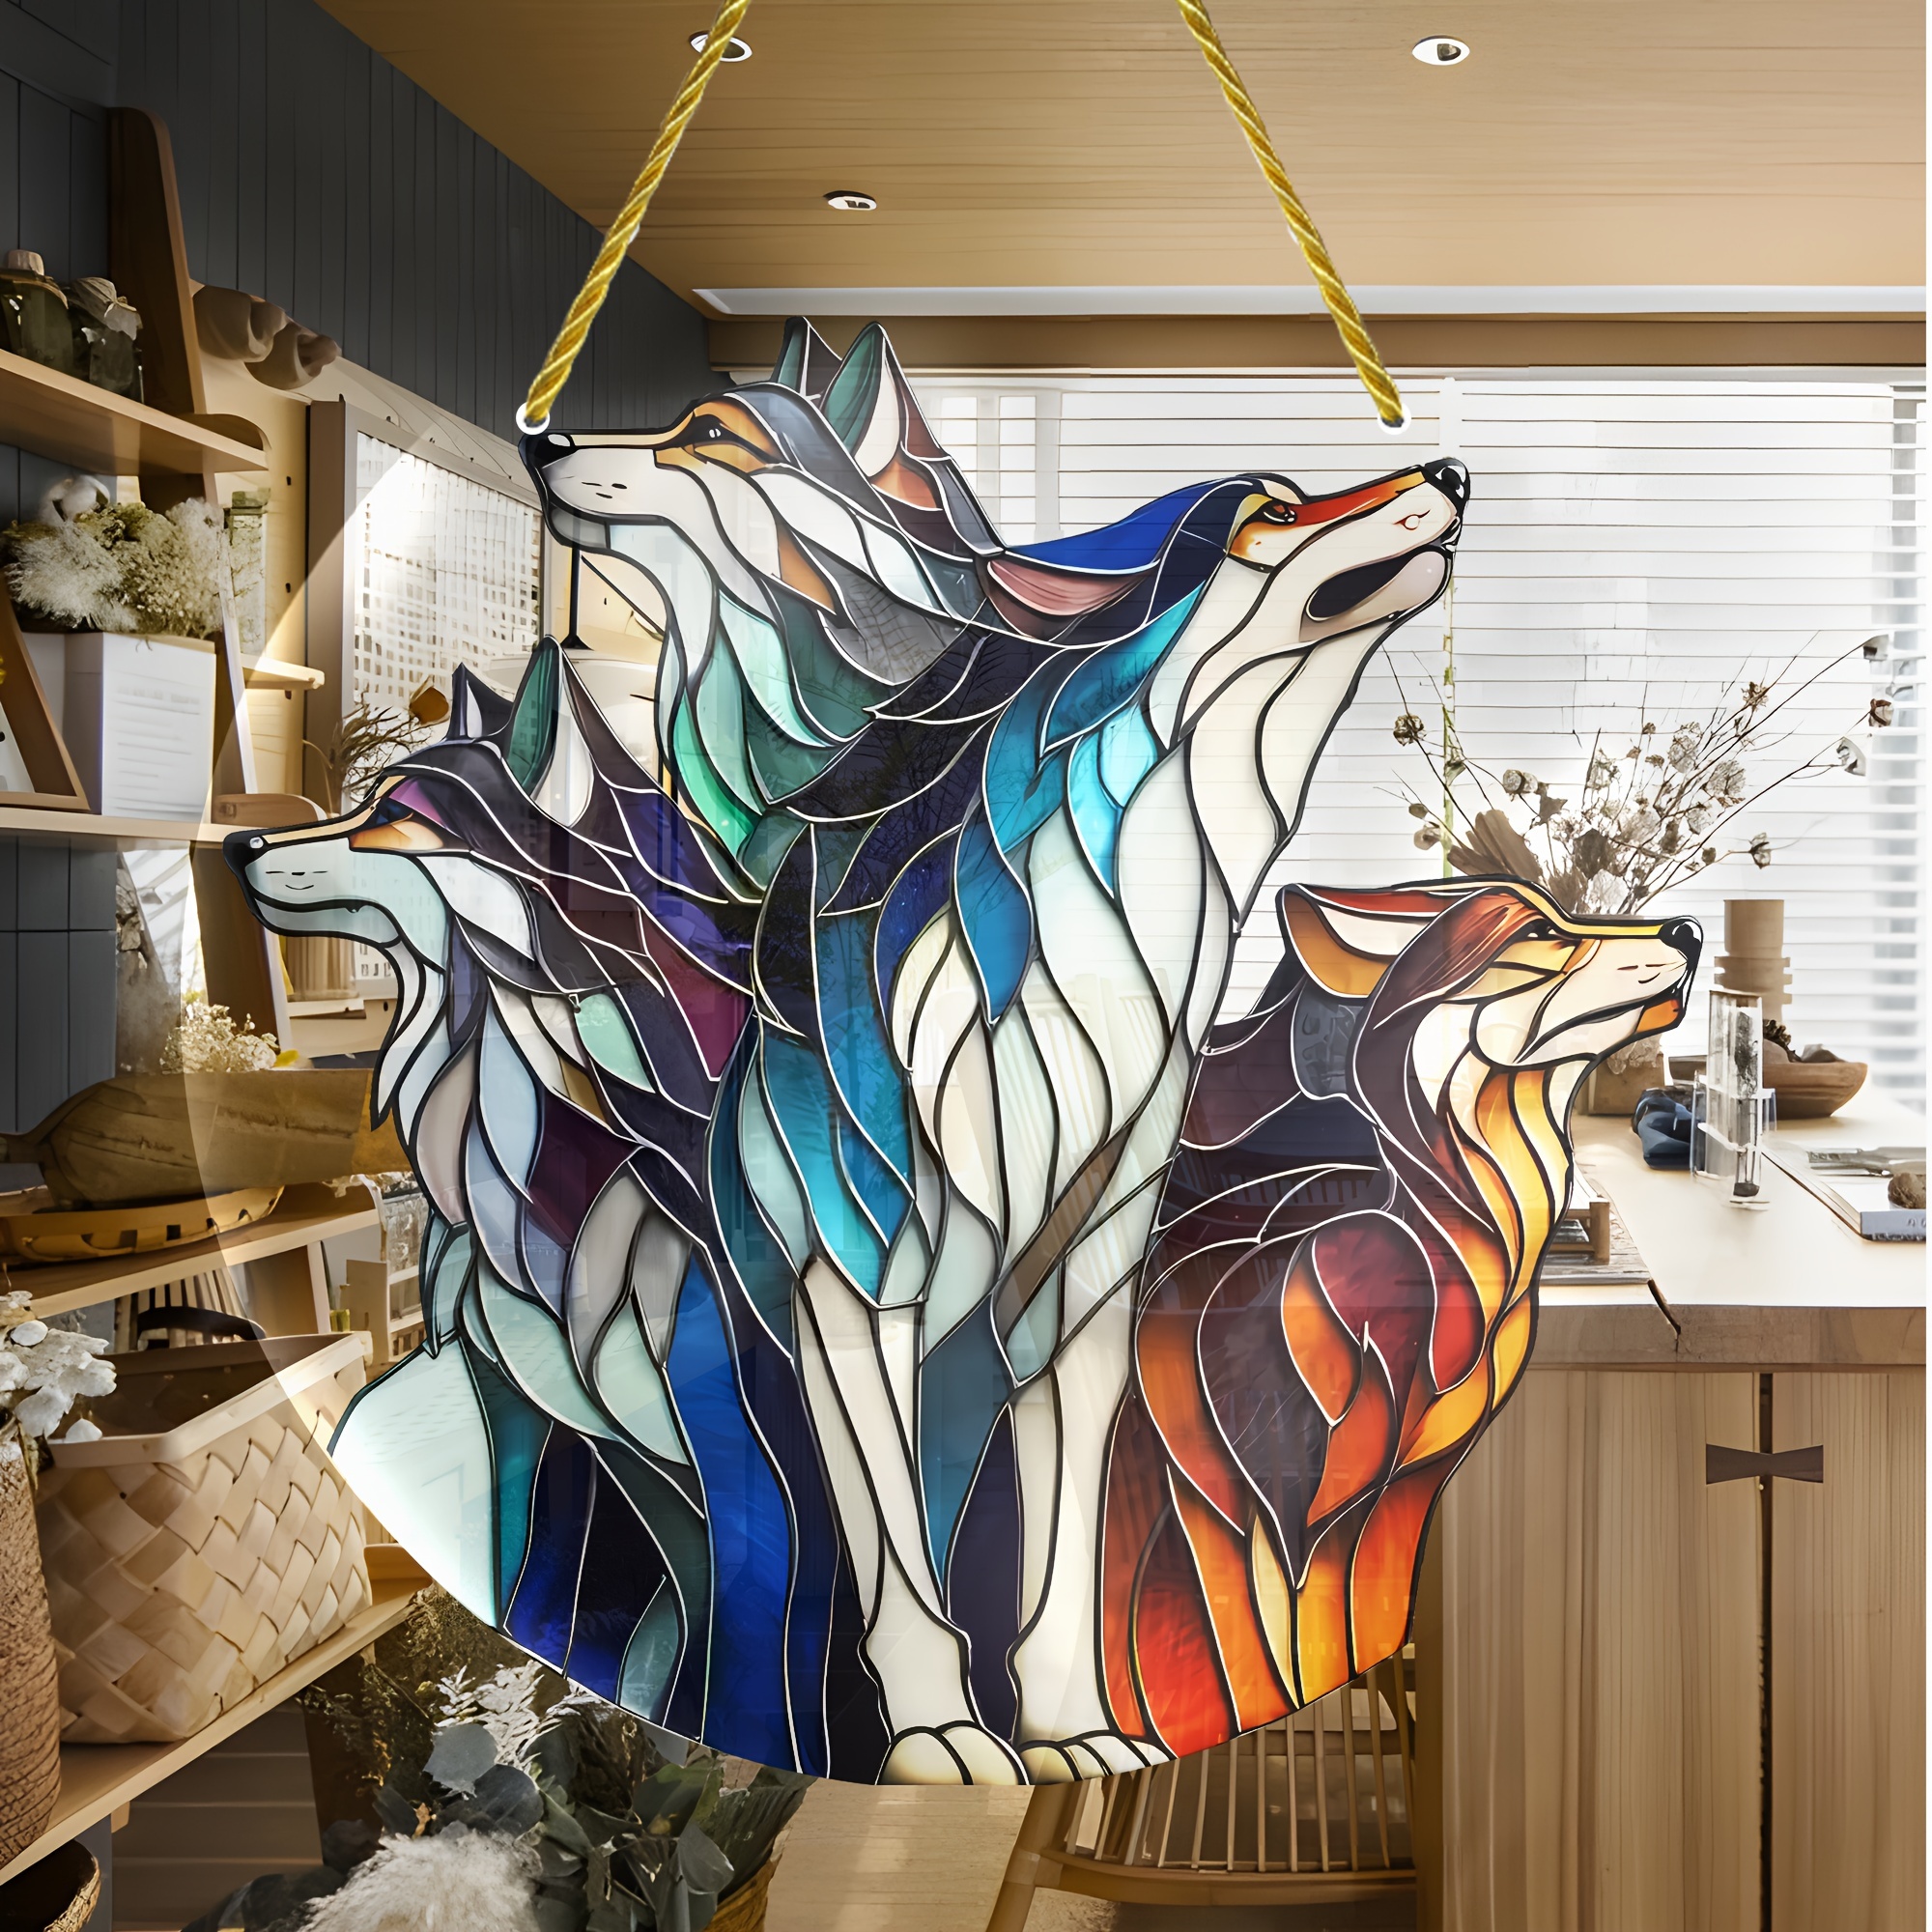 

Wolf Pack Suncatcher - Animal Theme Home Decor For Housewarming, High-quality Material, Safe Smooth Corners, Easy Mounting, Ideal Gift For Bedroom, Office, Patio